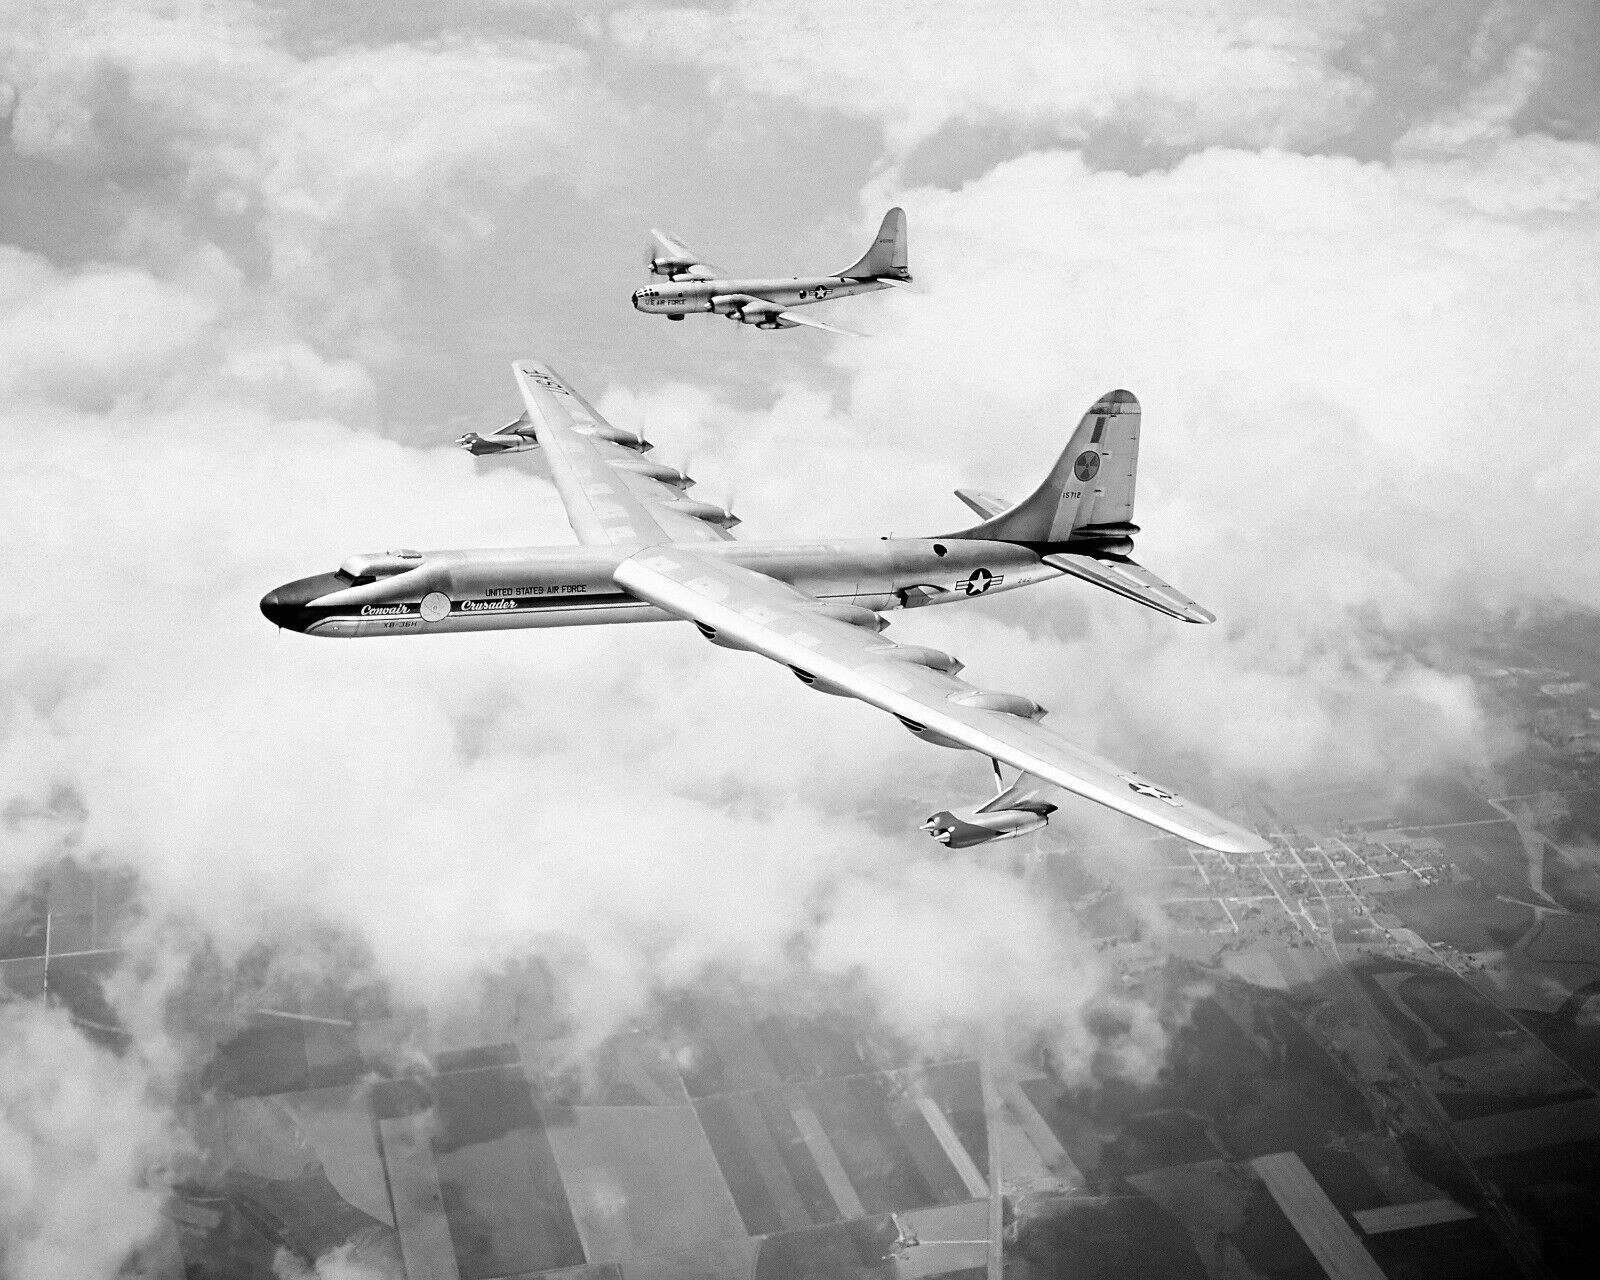 NB-36H Peacemaker Bomber Photograph Nuclear Reactor Test 1958 8X10 Photo Print